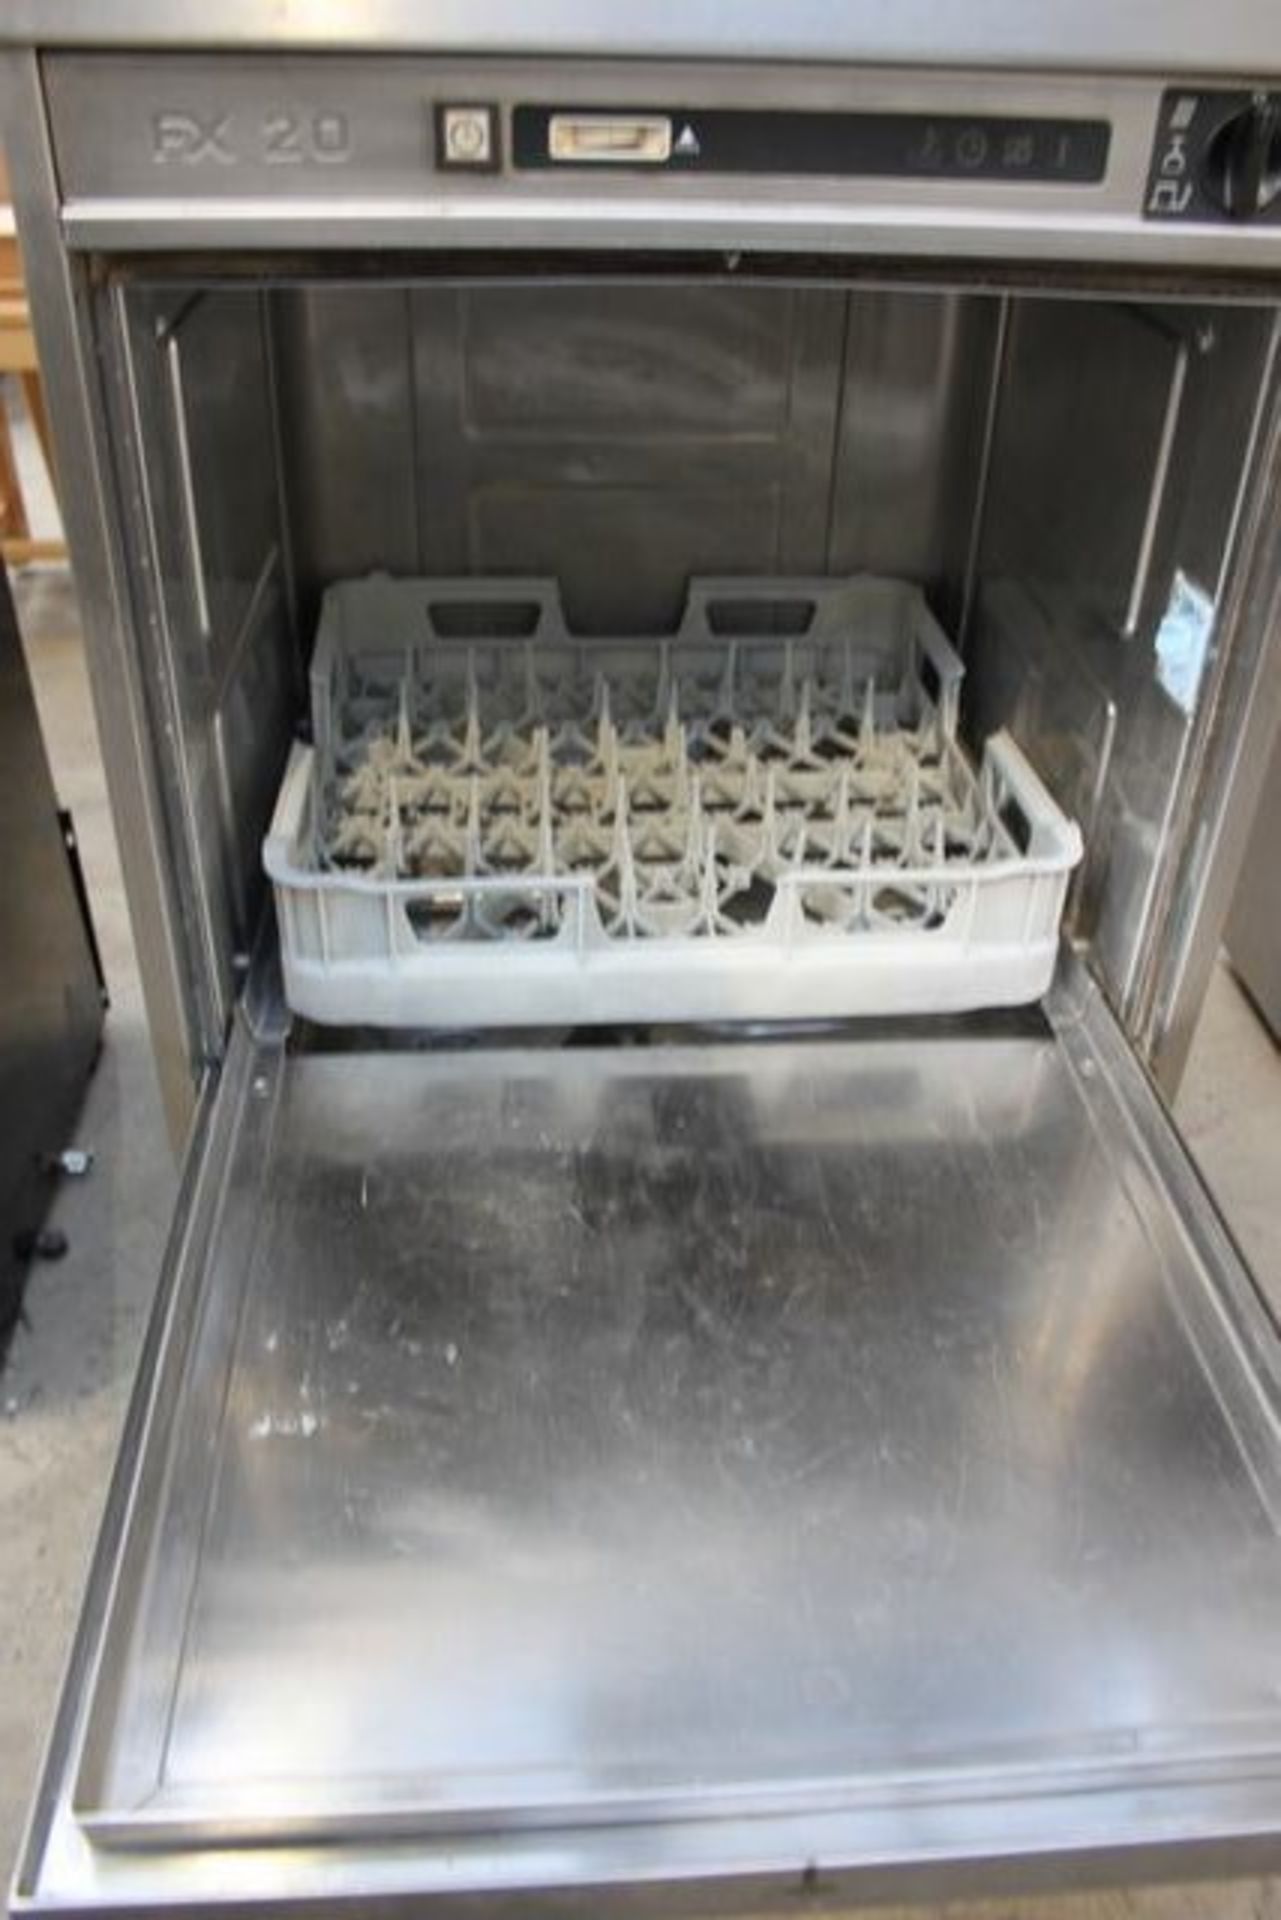 Hobart FX 20 commercial under counter dishwasher 3 phase up to 1260 plates / h, 70 baskets, 2520 - Image 2 of 2